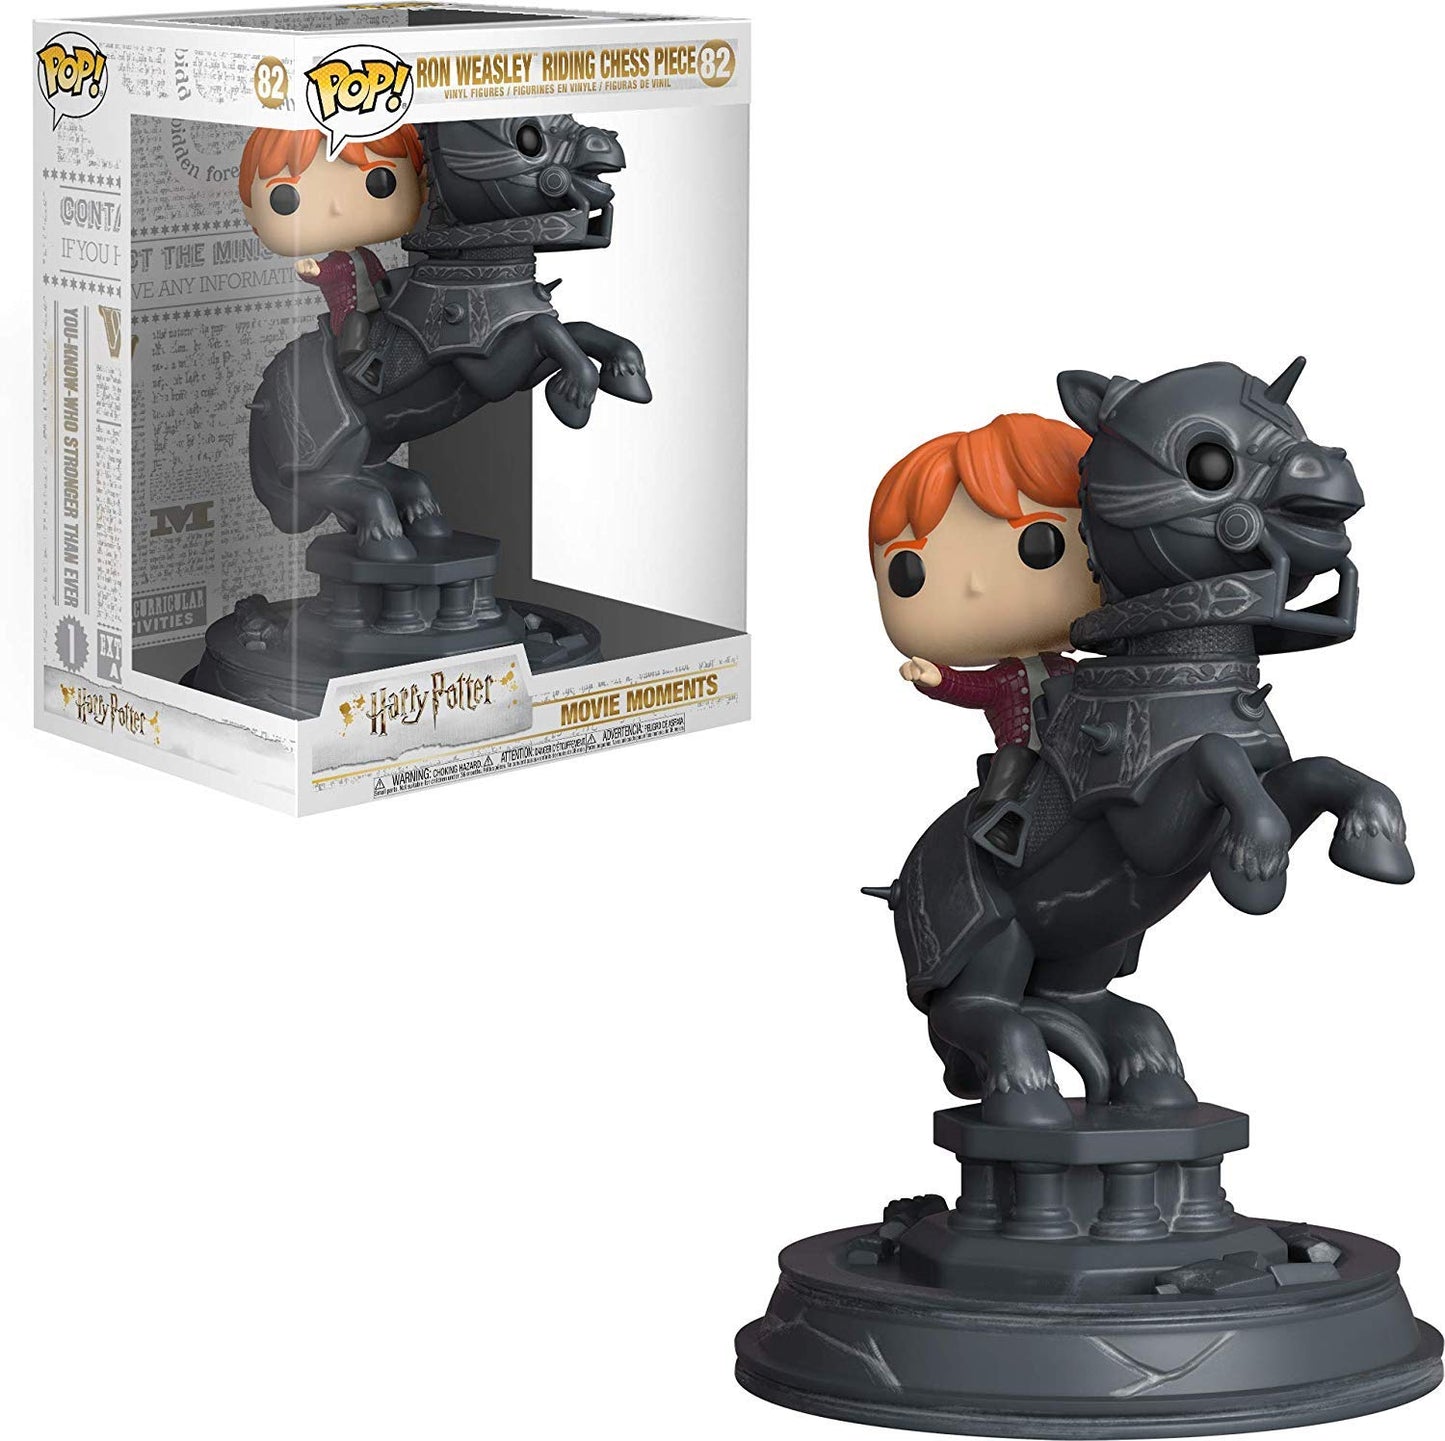 Funko POP! Harry Potter Movie Moments Ron Weasley Riding Chess Piece #82